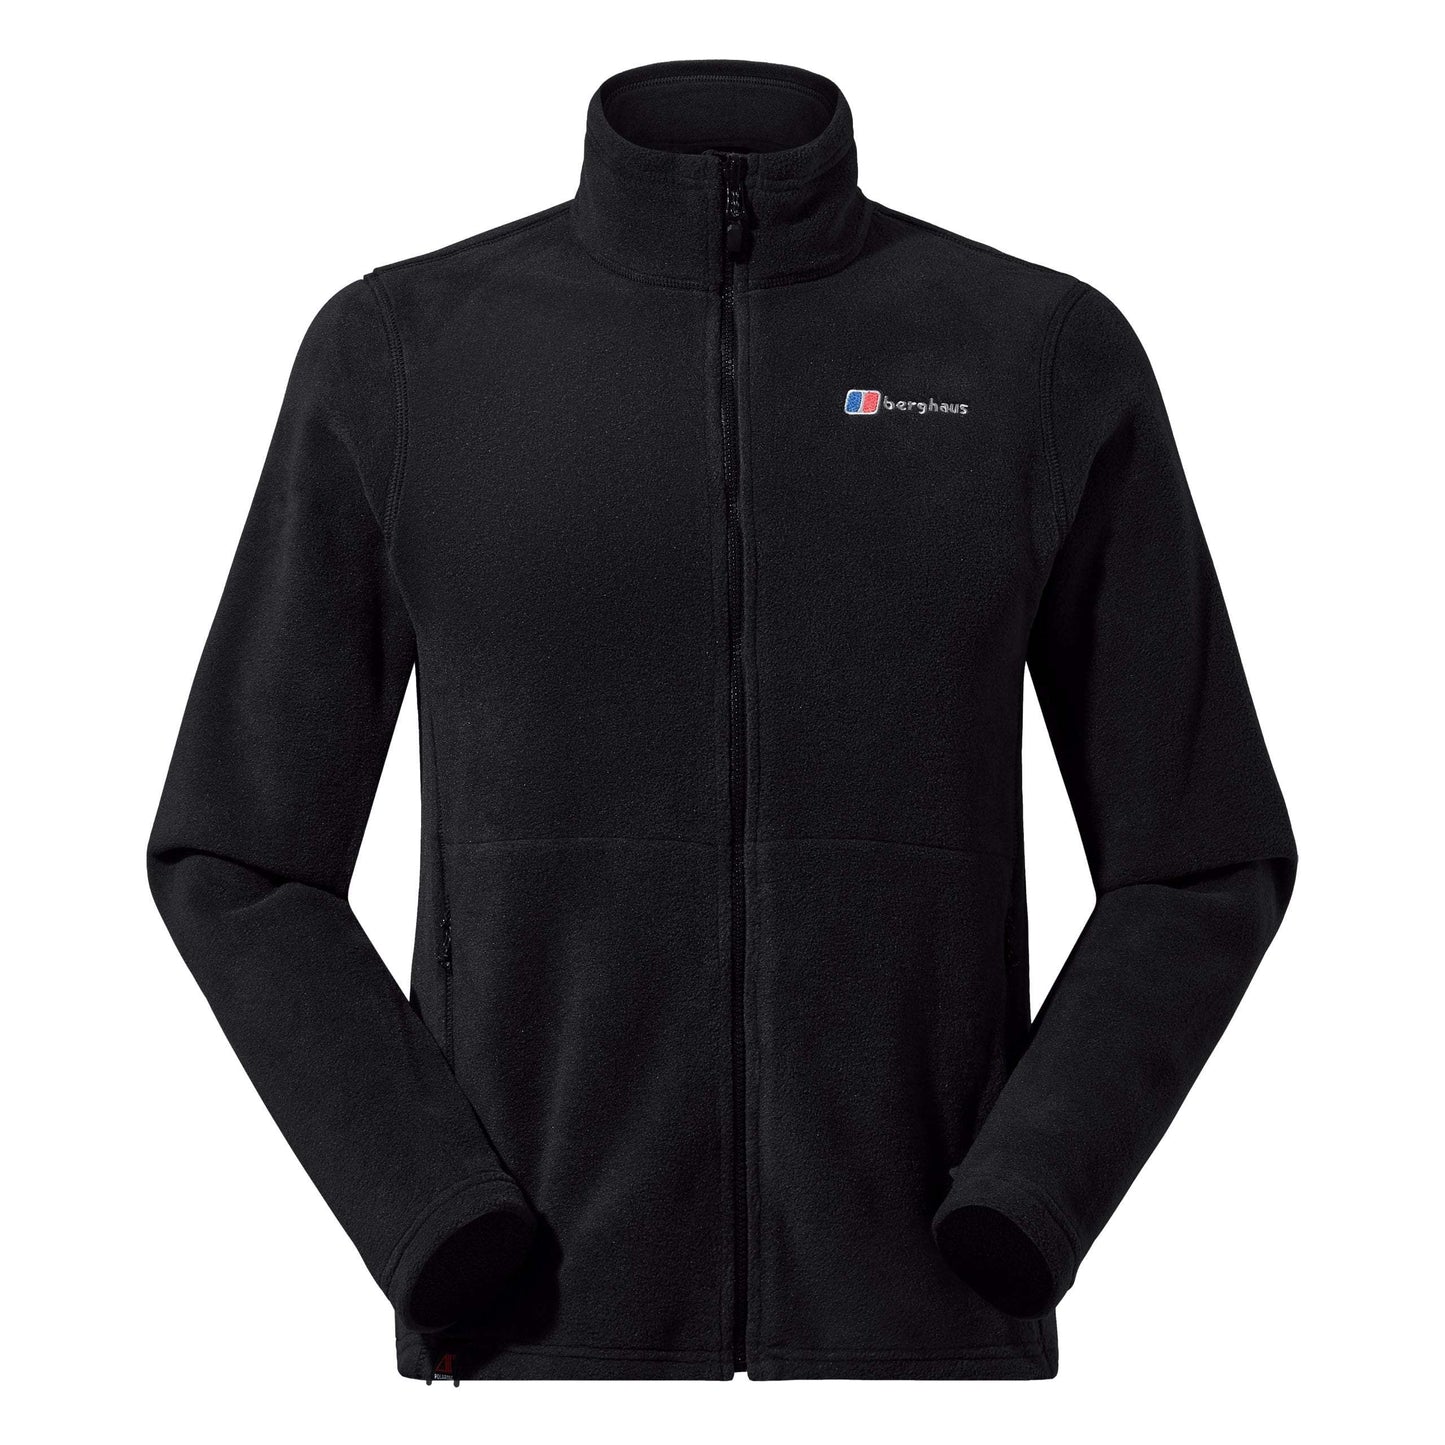 Berghaus Men’s Prism PT IA FL Jkt - The Luxury Promotional Gifts Company Limited